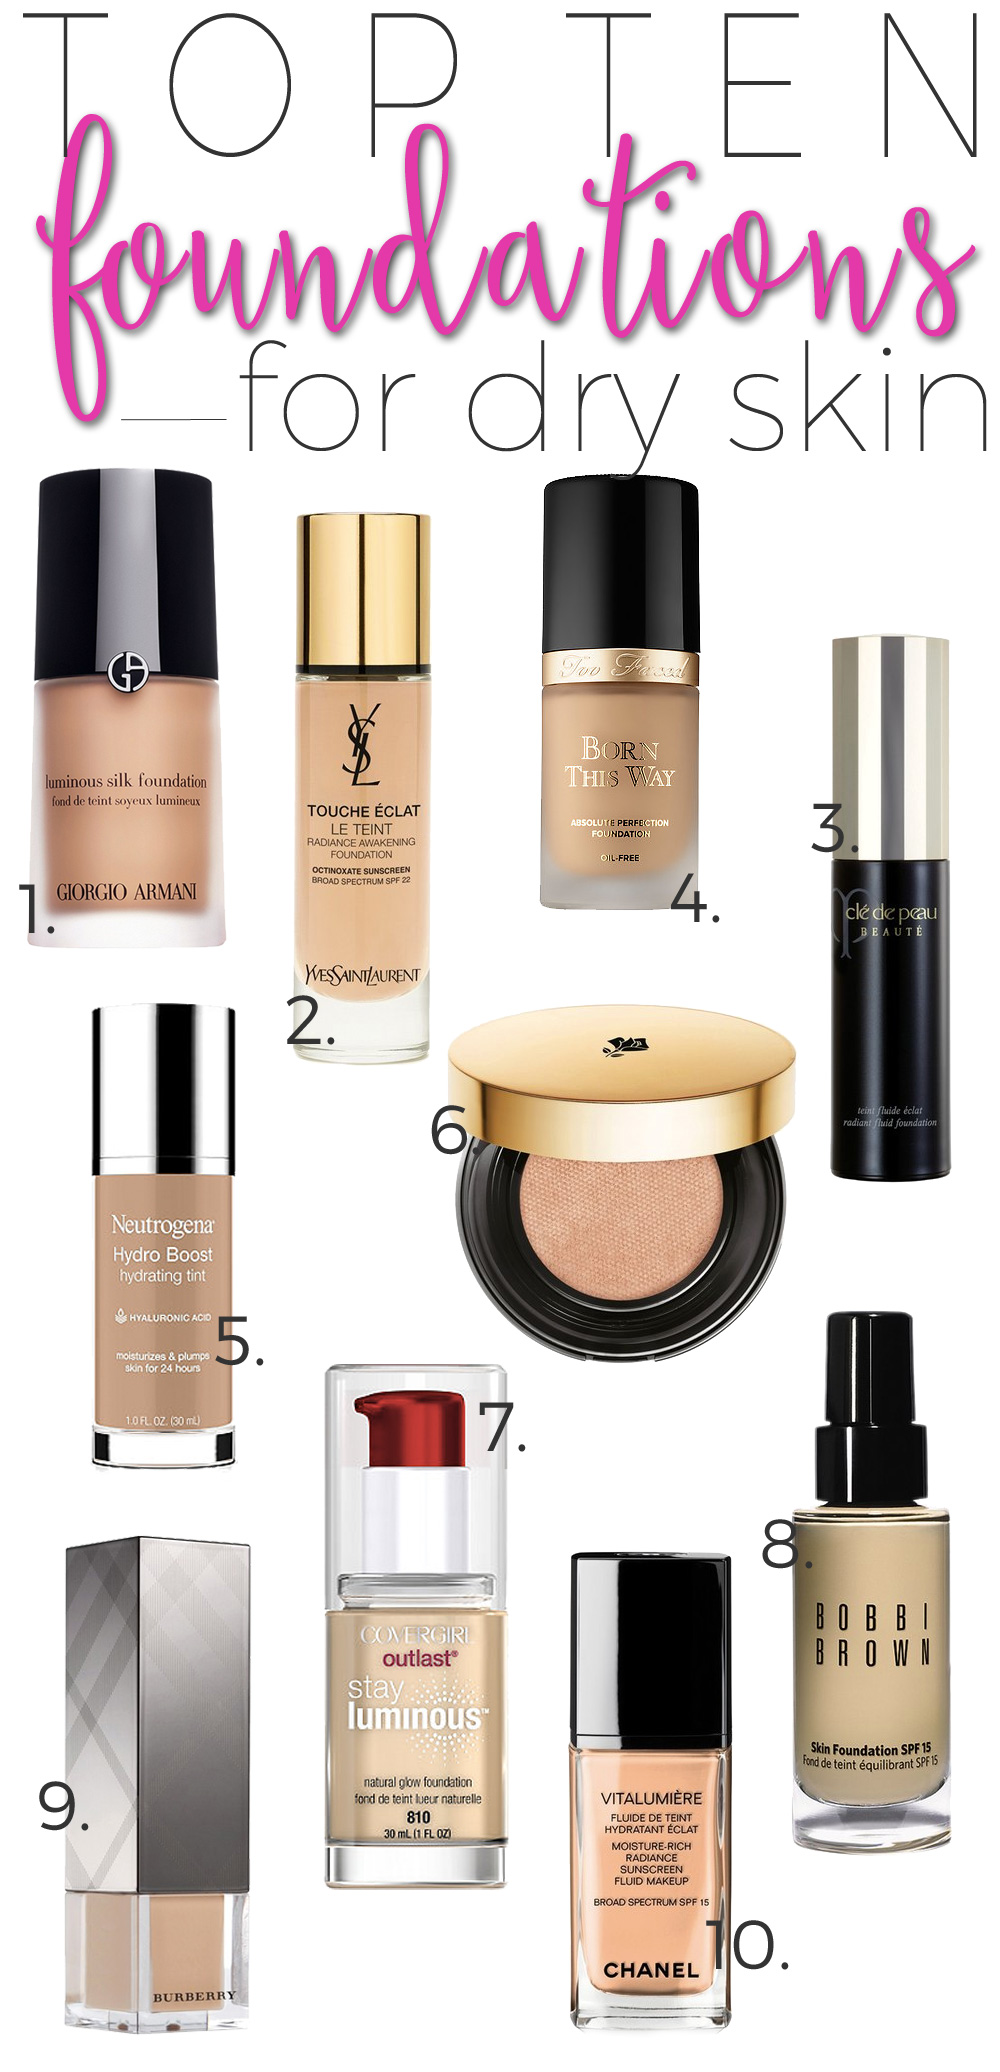 Top 10 Foundations for Dry Skin. — Beautiful Makeup Search